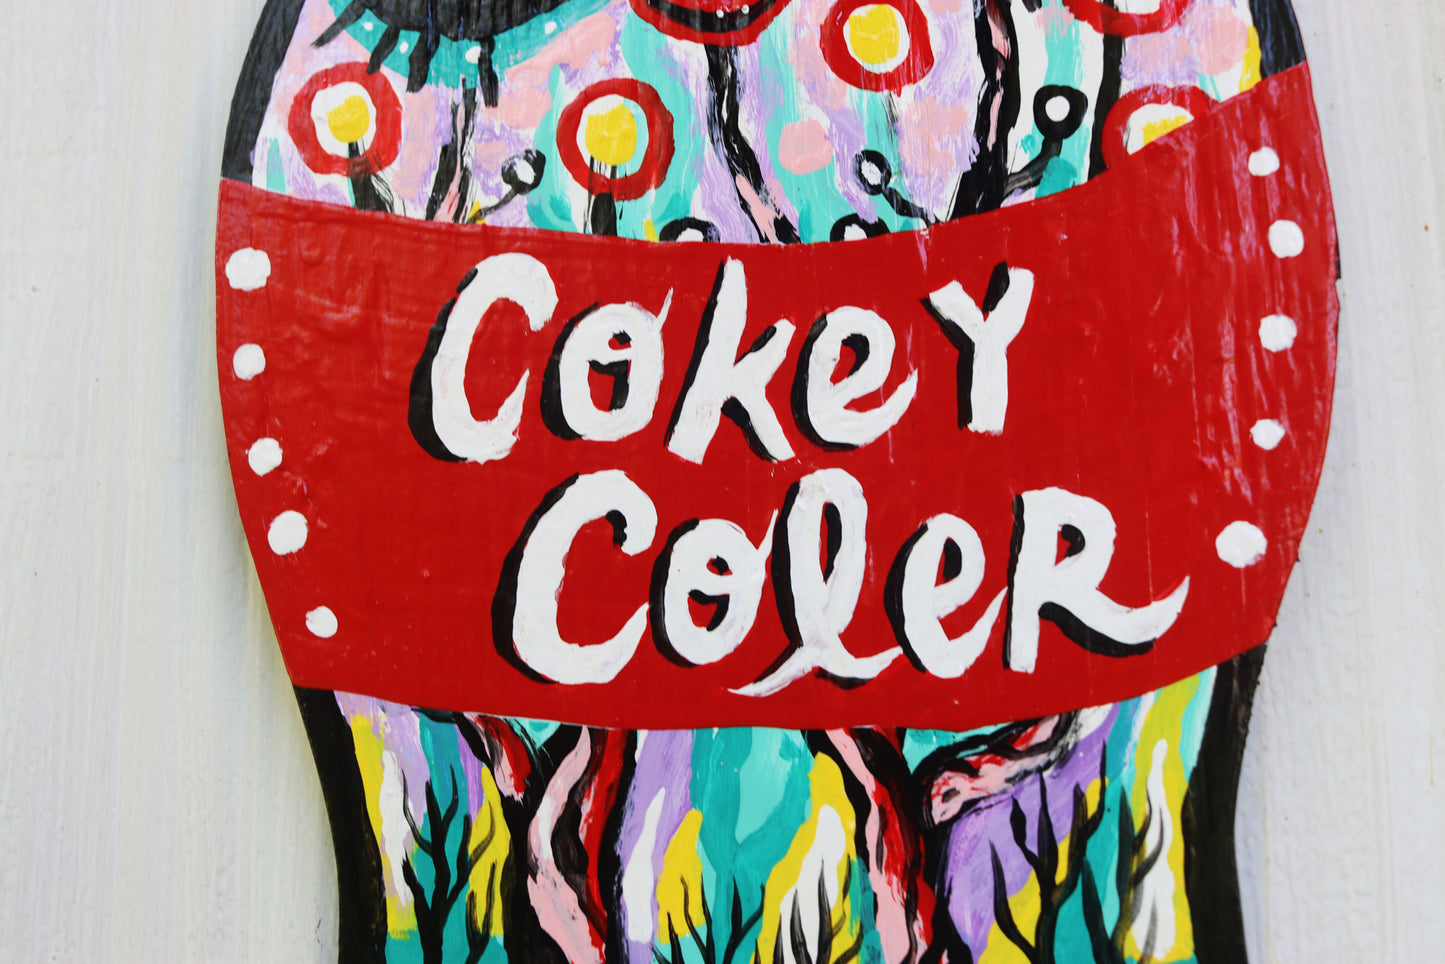 Cokey Coler Bottle with Flowers